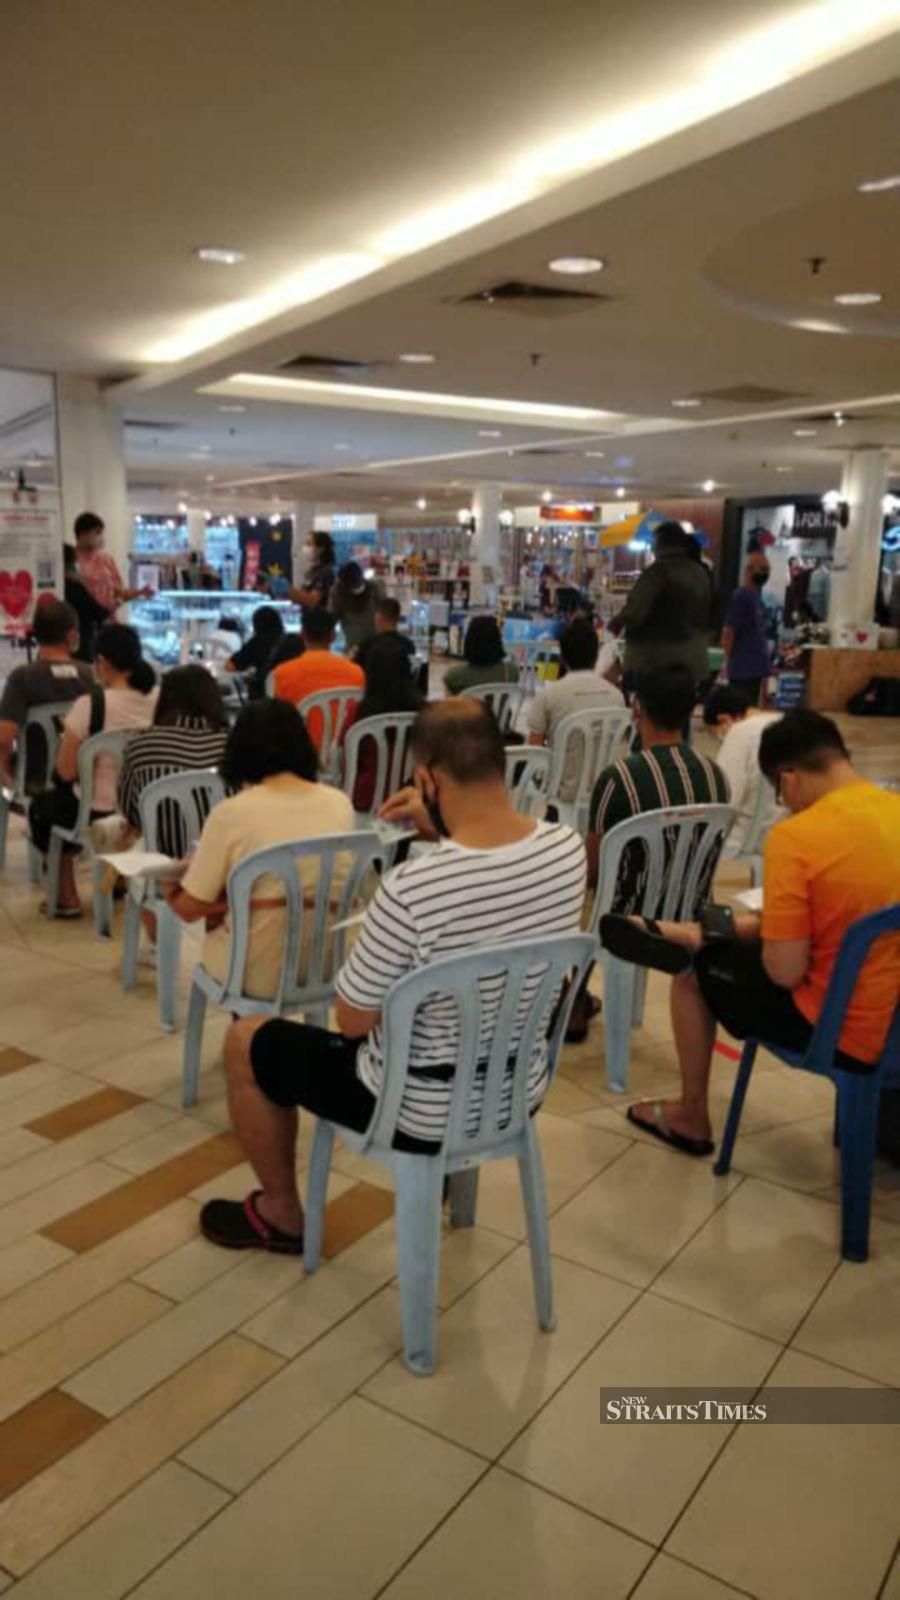 People patiently waiting for their turn to donate blood at Metro Point Complex, Kajang. - NSTP pic